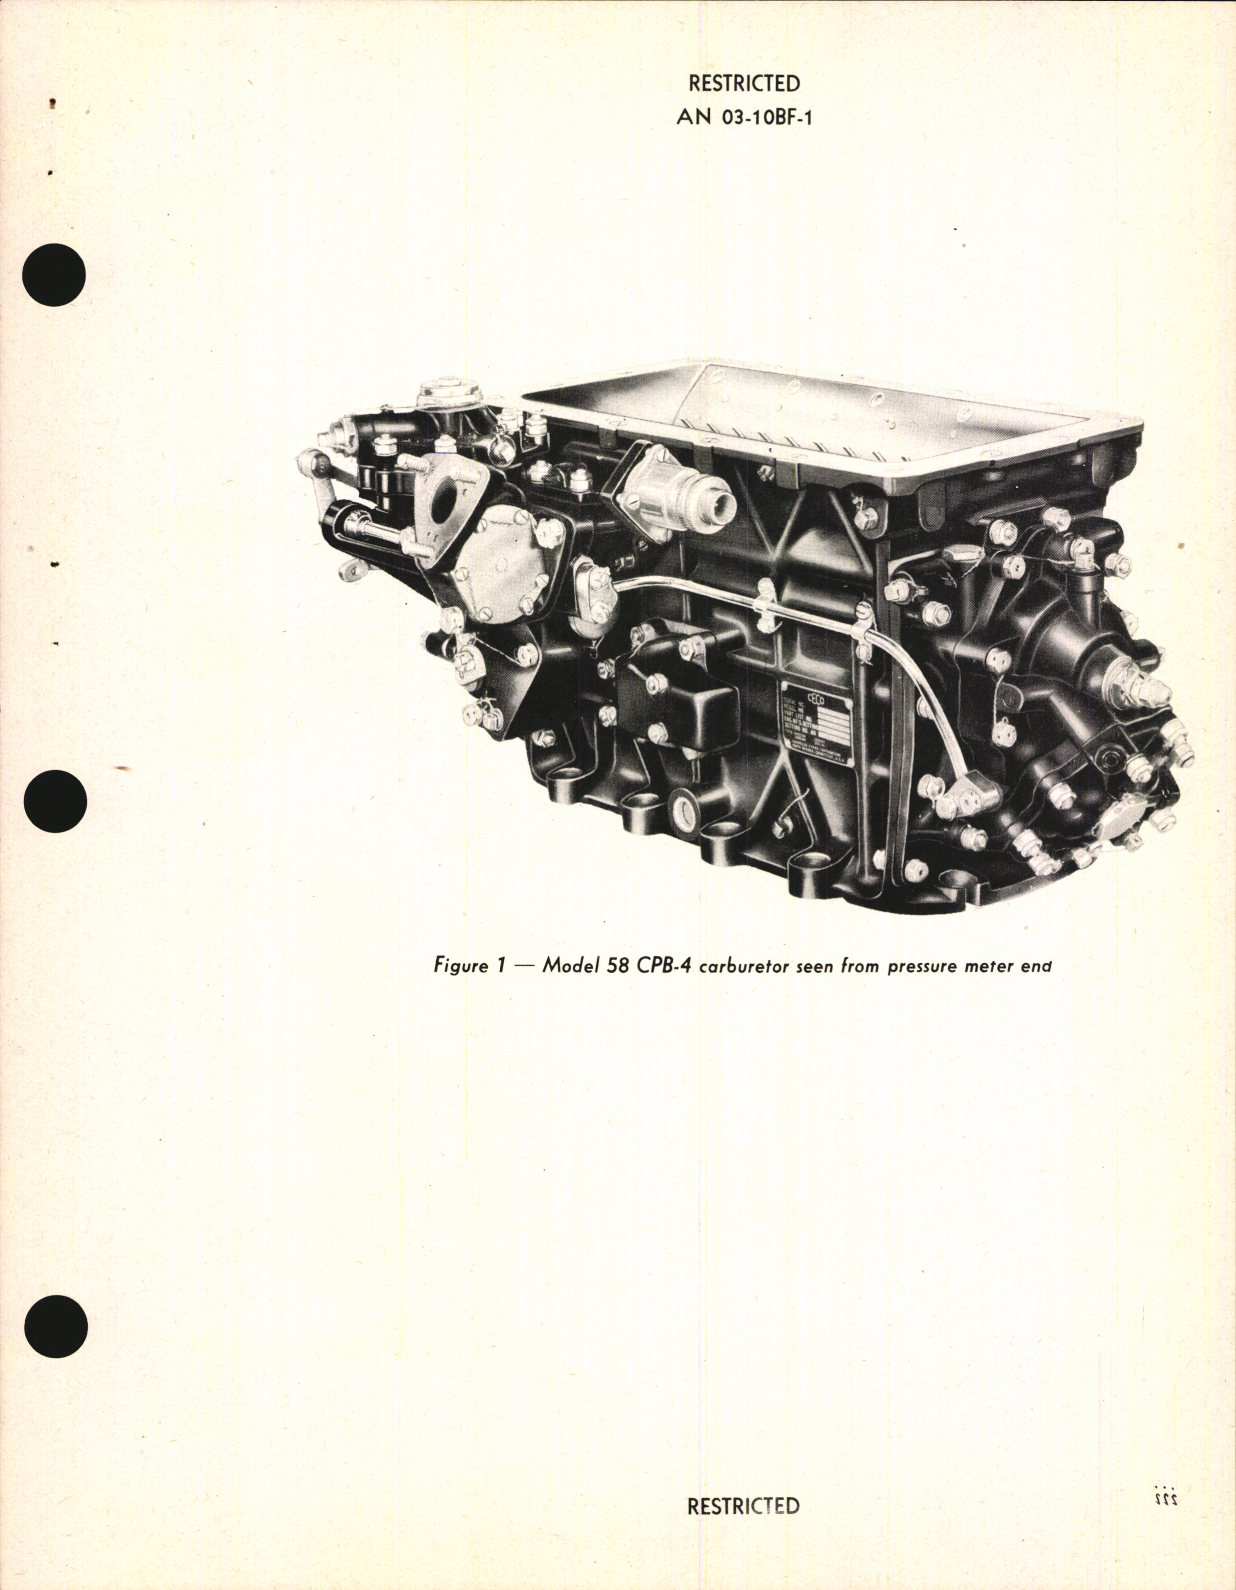 Sample page 5 from AirCorps Library document: Handbook of Instructions with Parts Catalog for Hydro-Metering Carburetor Model 58CPB-4